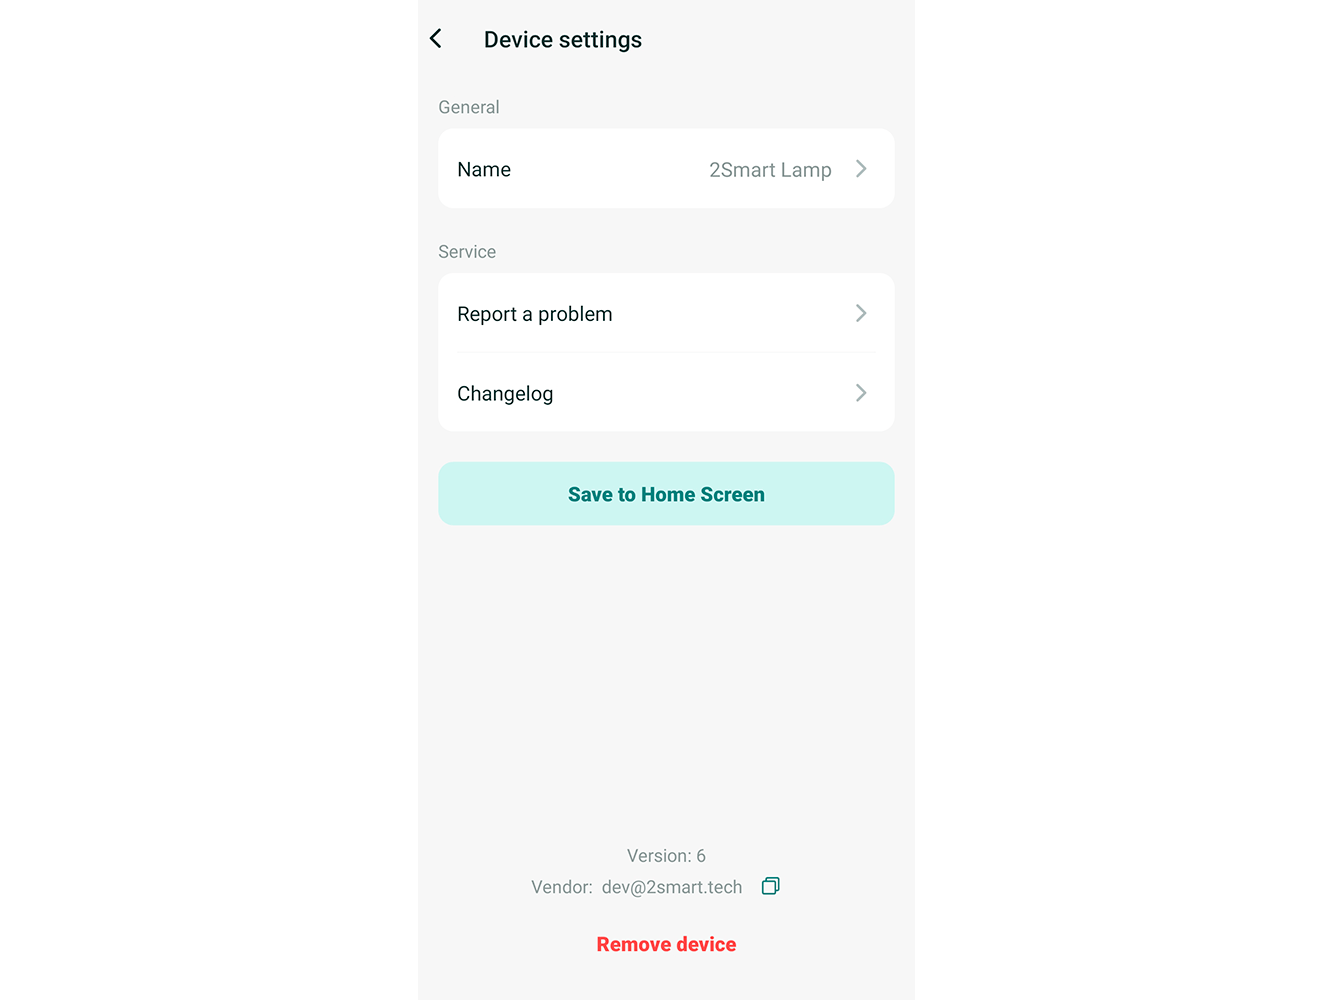 The Device settings screen